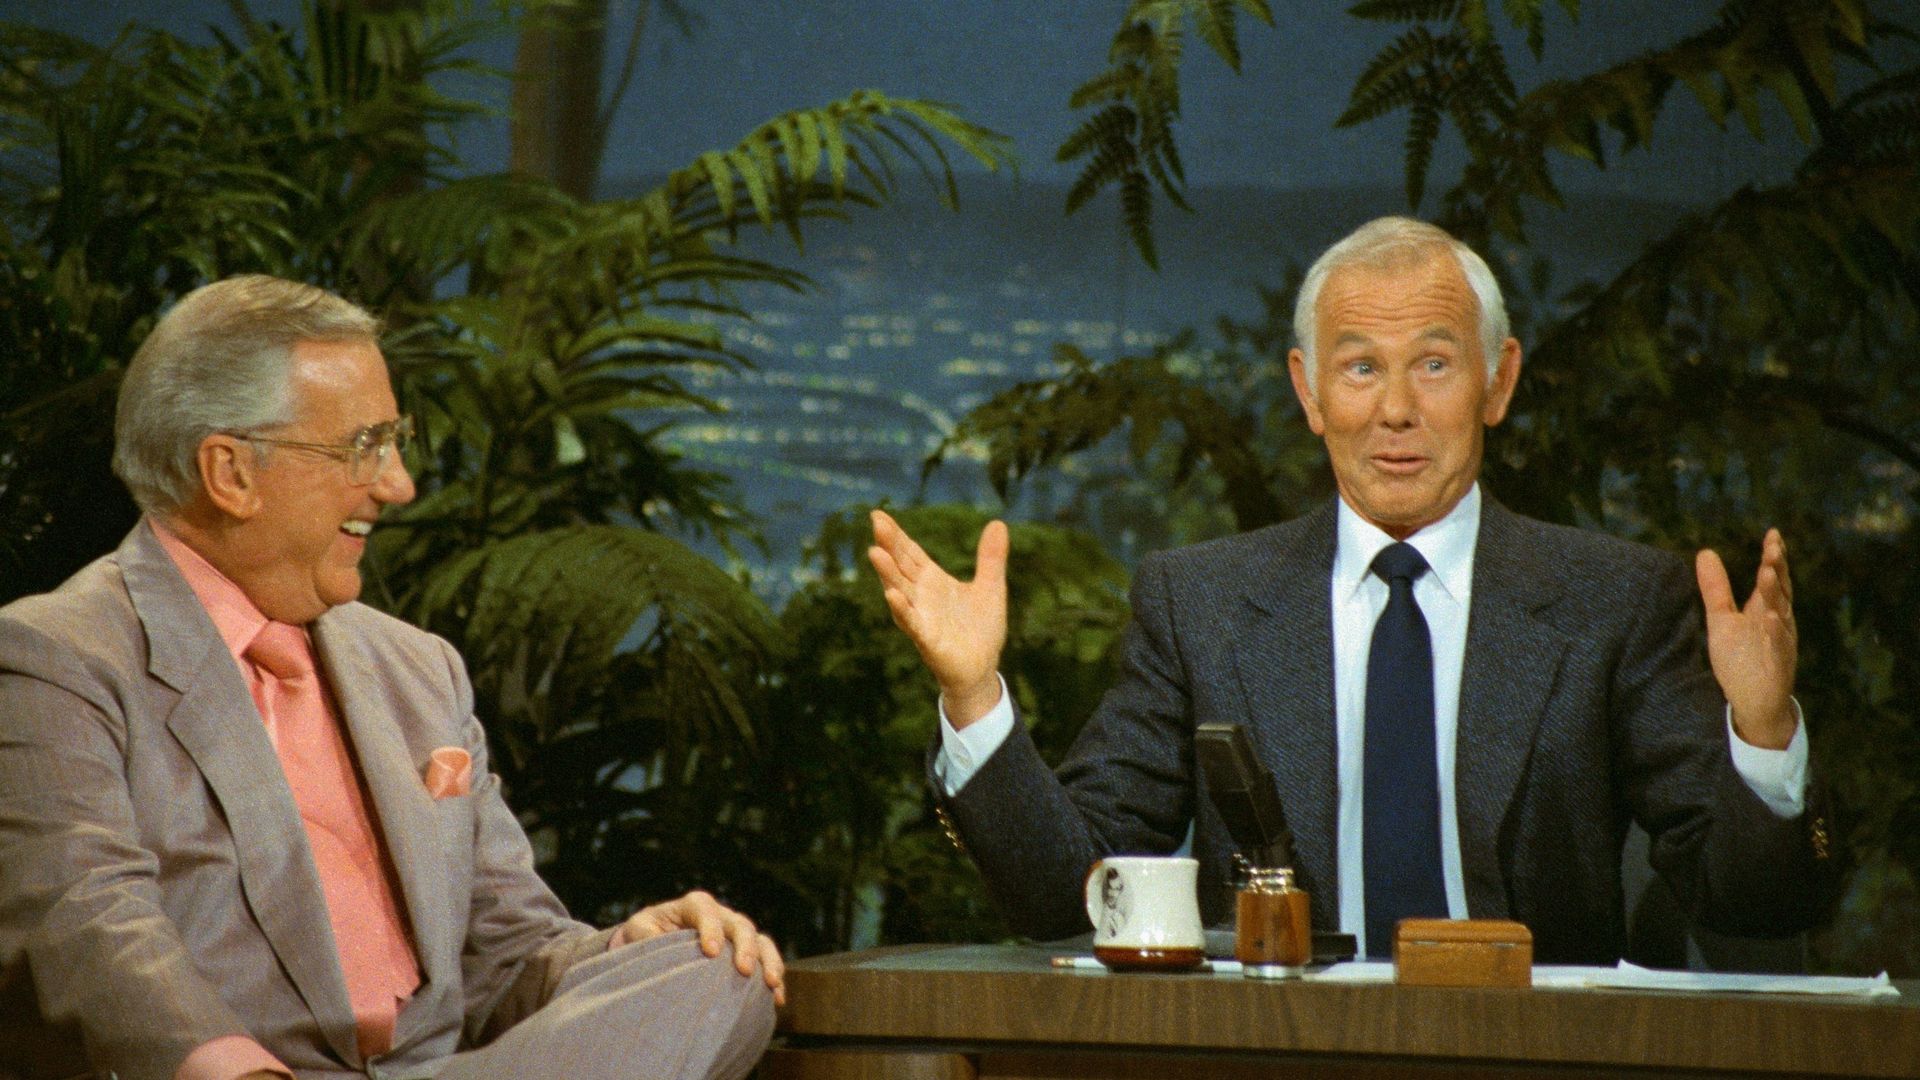 Johnny Carson and Ed McMahon on The Tonight Show